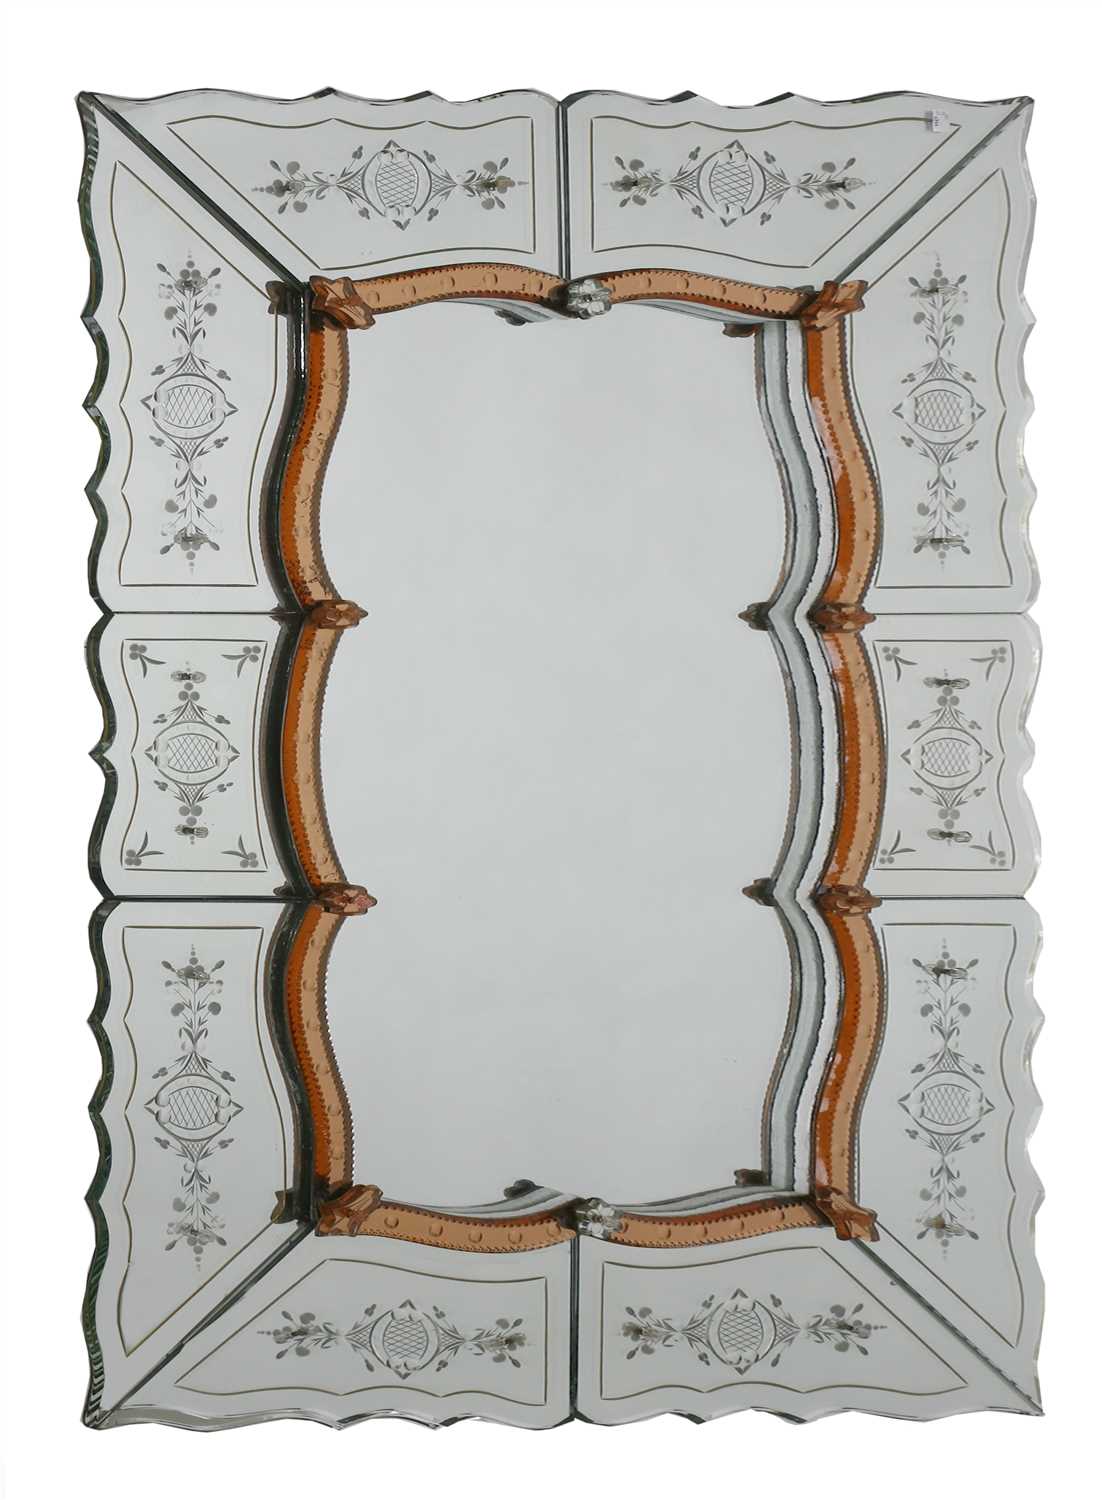 Lot 251 - A French multiplate wall mirror